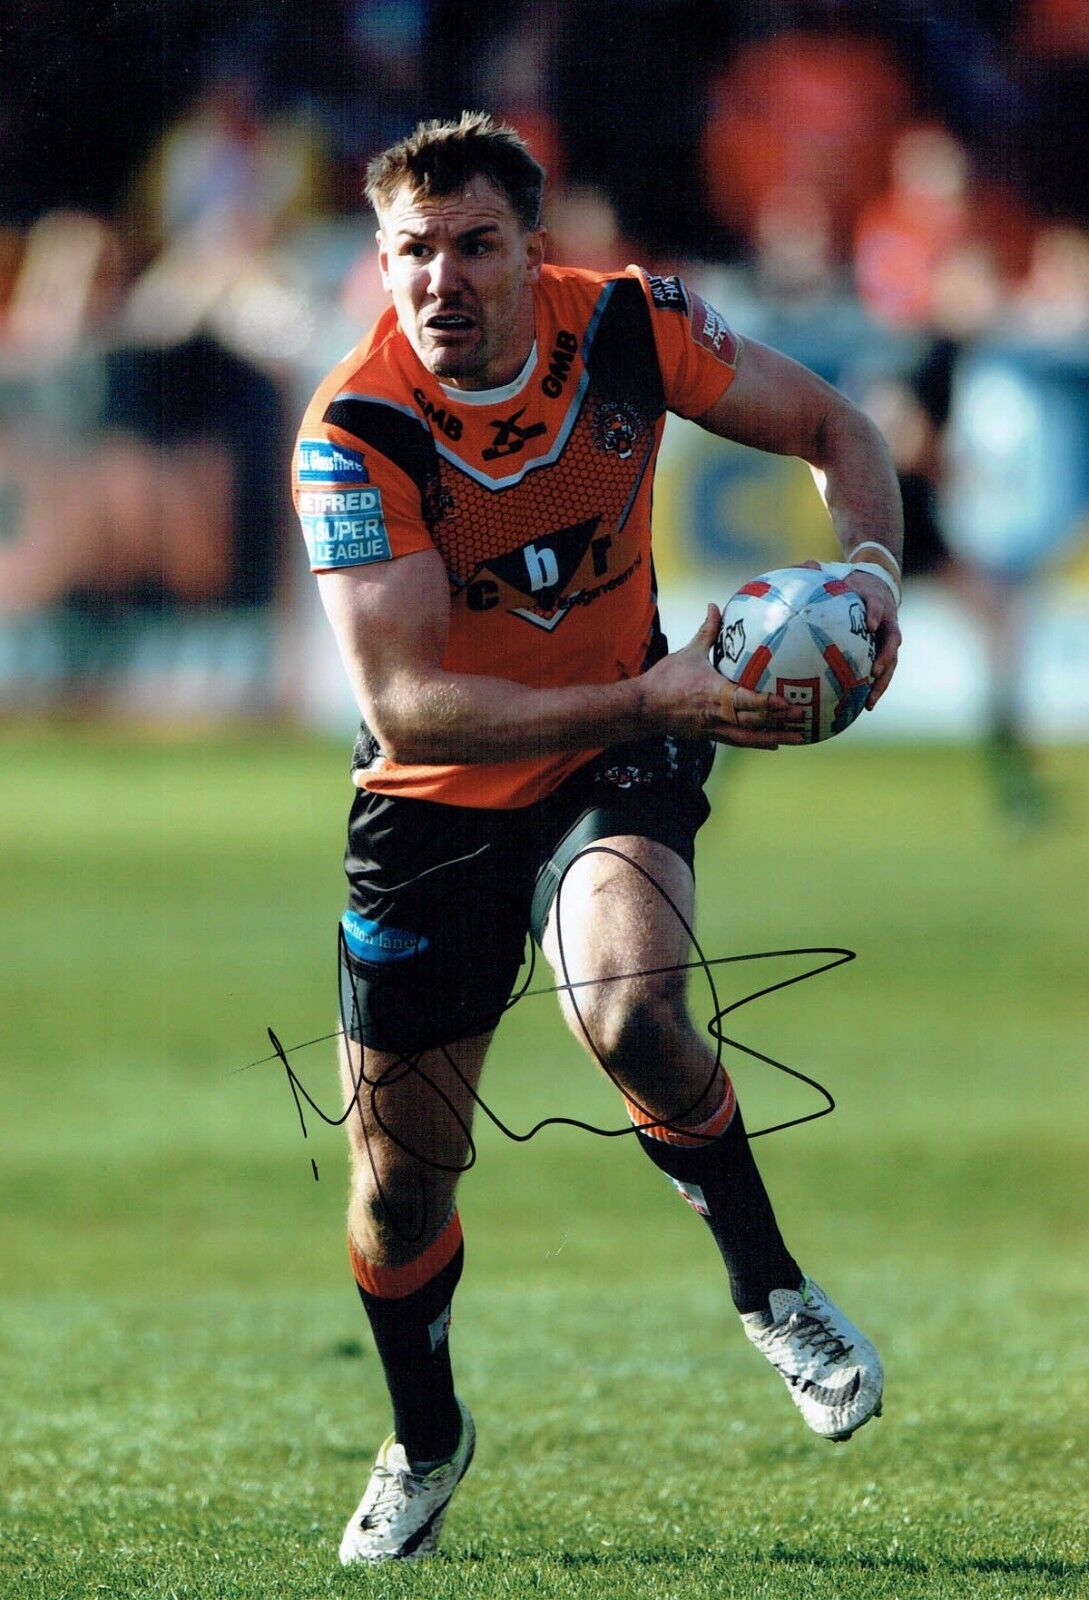 Michael SHENTON Castleford Tigers Rugby Signed Autograph 12x8 Photo Poster painting AFTAL COA